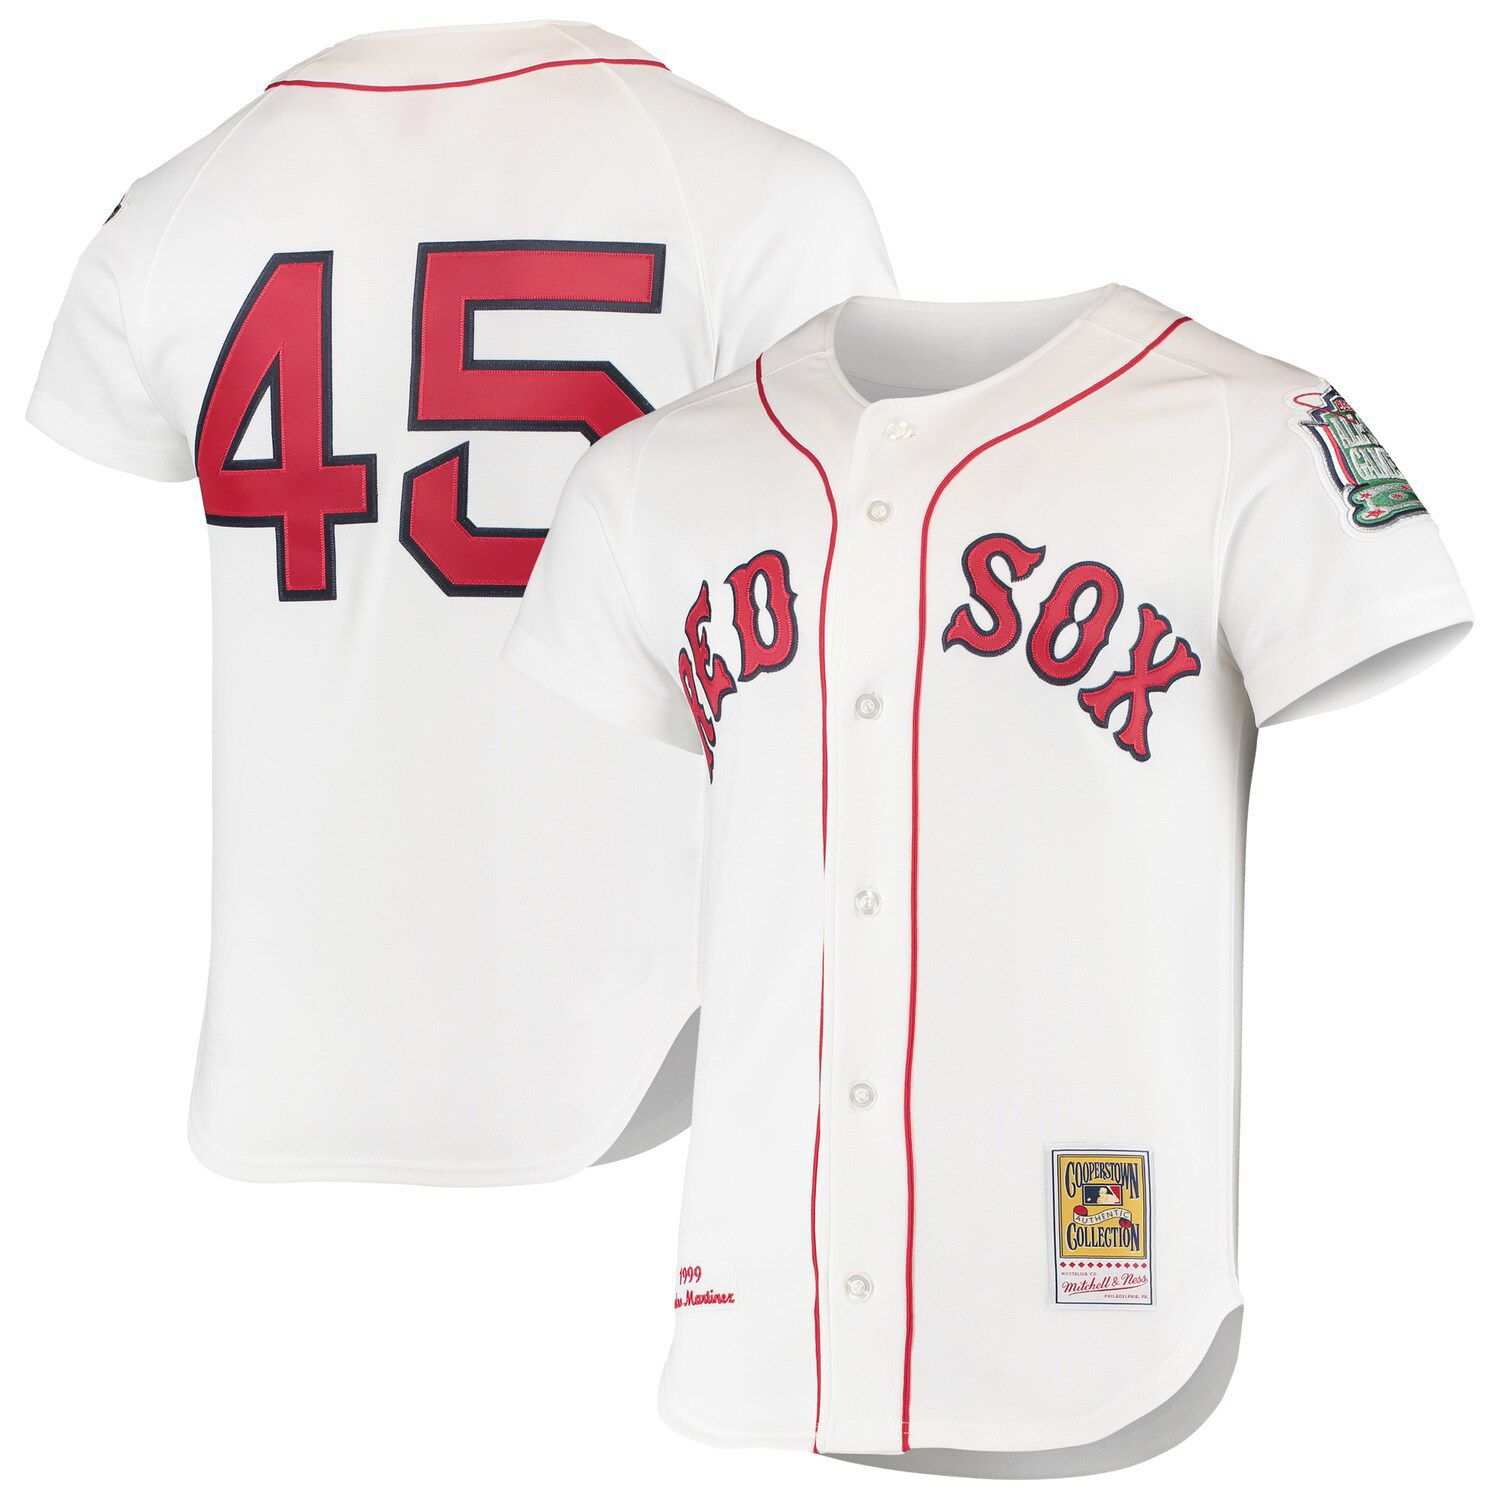 red sox jersey near me